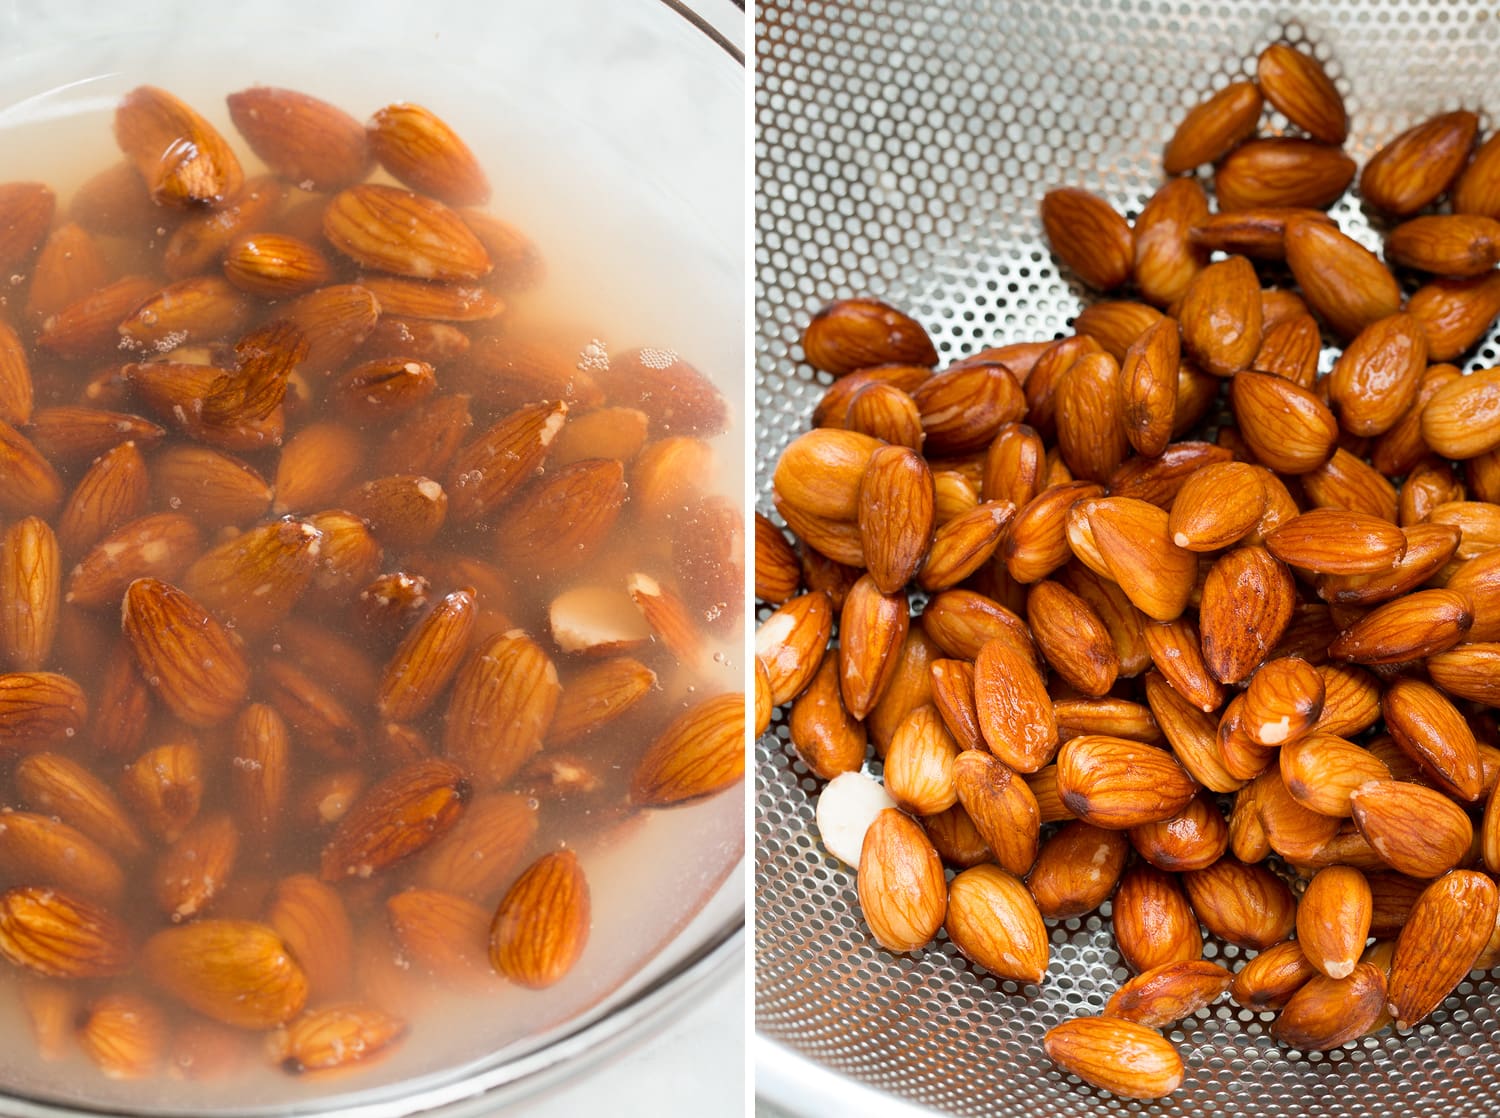 Showing steps of making homemade almond milk. Shows almonds before and after soaking in water.